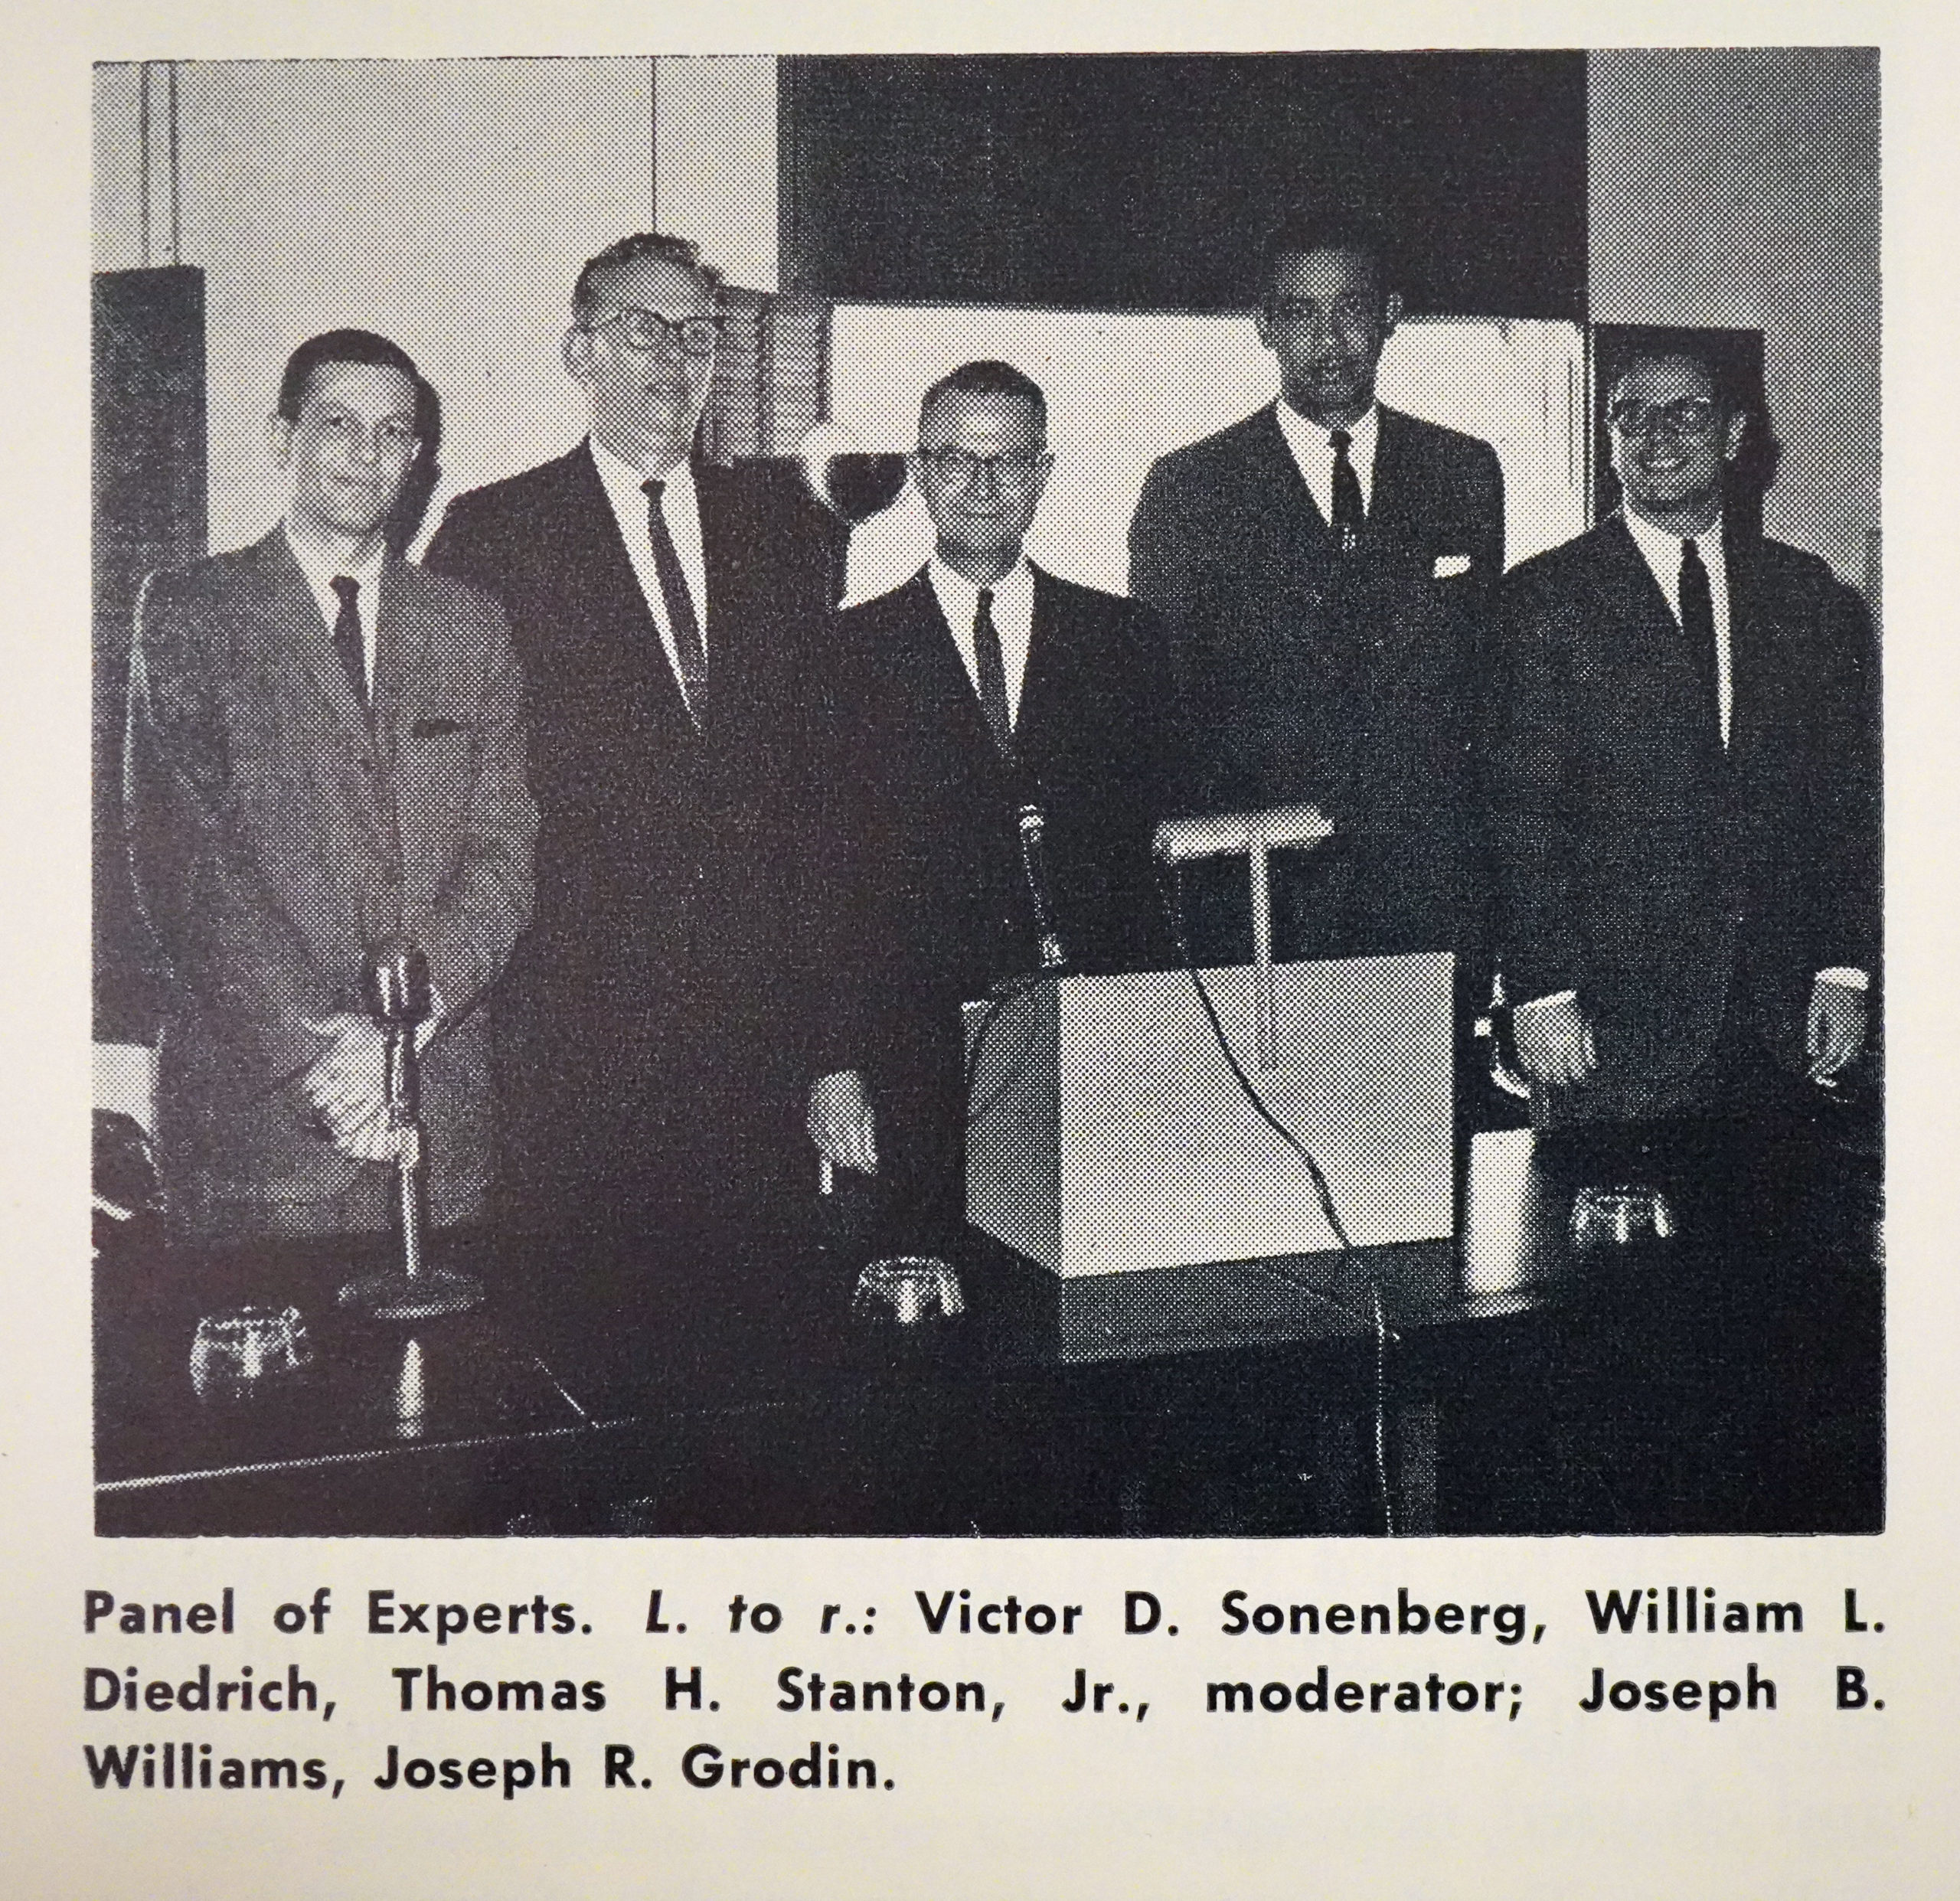 BASF's Civil Rights Committee hosts an event on May 27, 1964 with a panel of experts.
